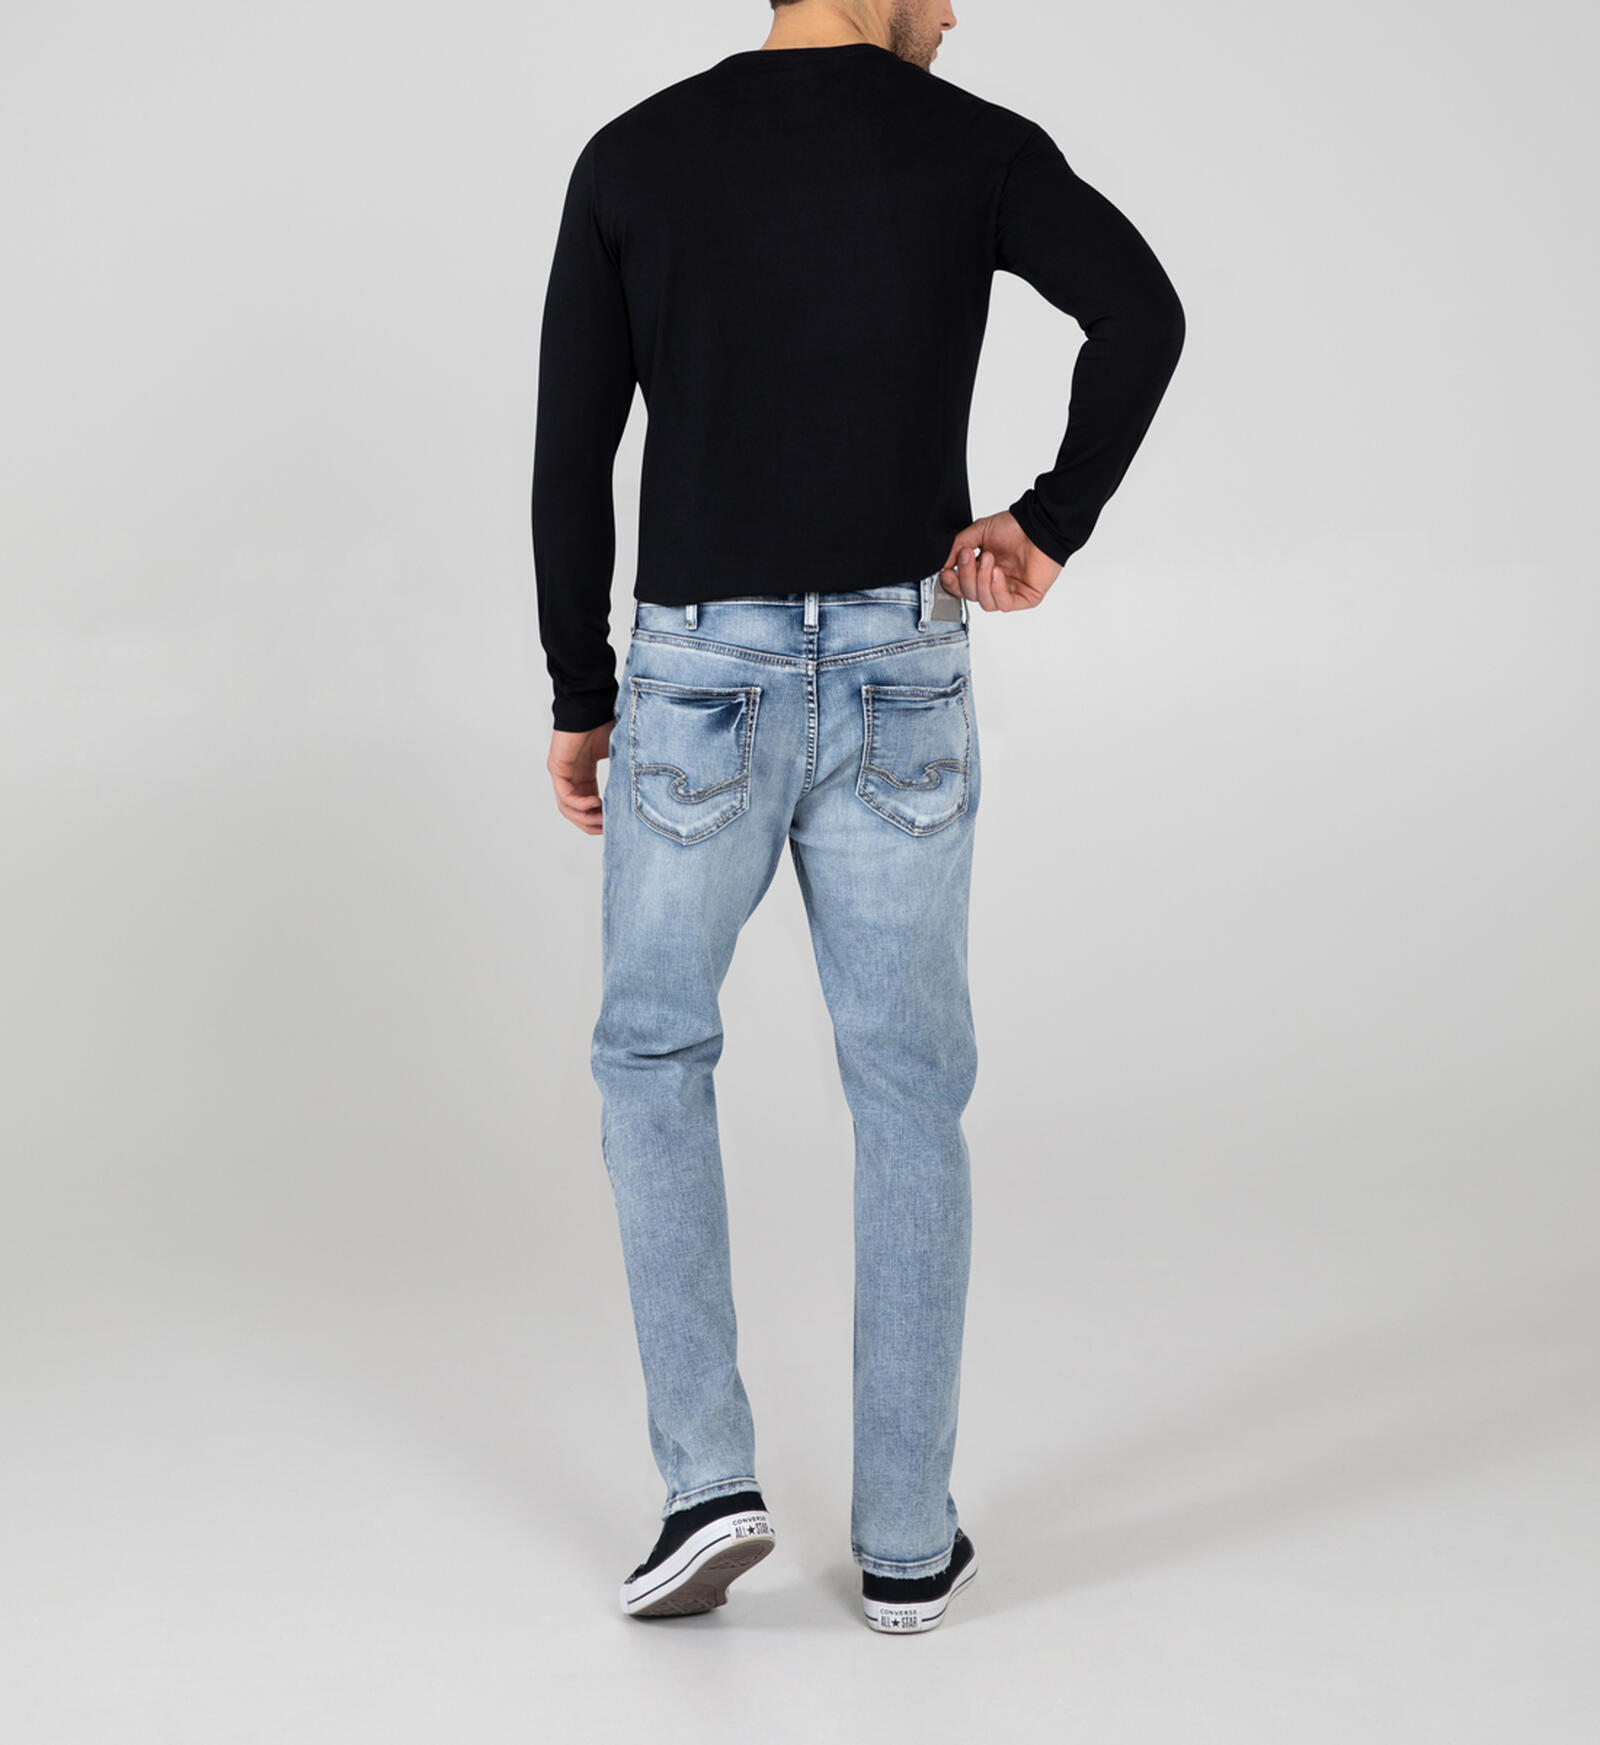 Buy Grayson Classic Fit Straight Leg Jeans for CAD 124.00